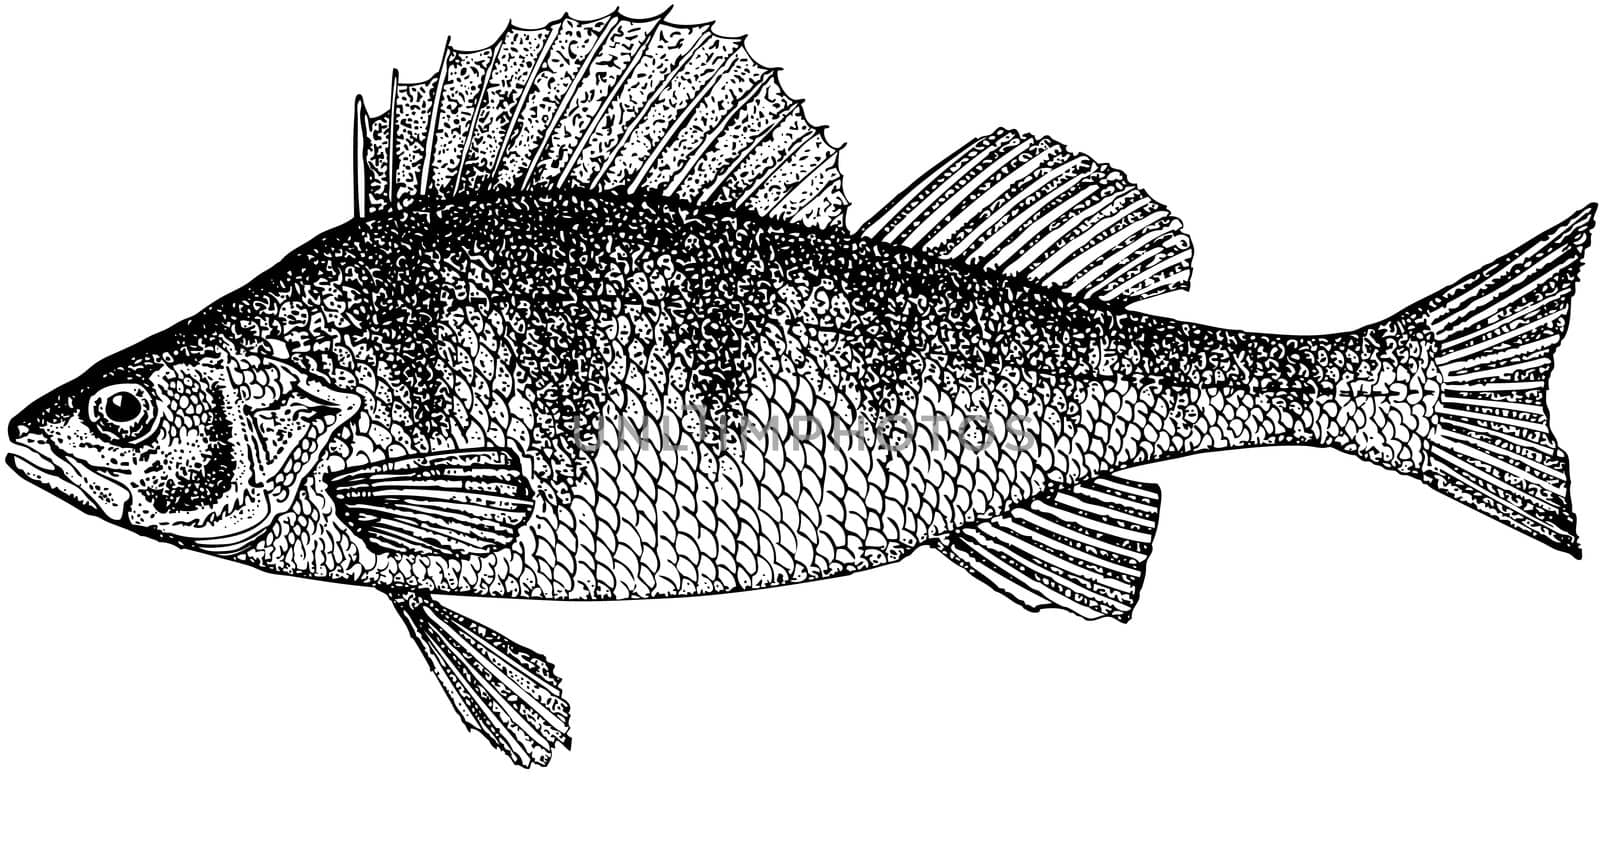 Illustration. A fish the perch. Model was just the caught fish. The further information from various sources. The perch of one most numerous inhabitants of fresh waters. The normal sizes up to 1200 gram about 52 centimeters are long.The anatomic, correct image of the river perch. The image of a river fish, in a black-and-white variant.